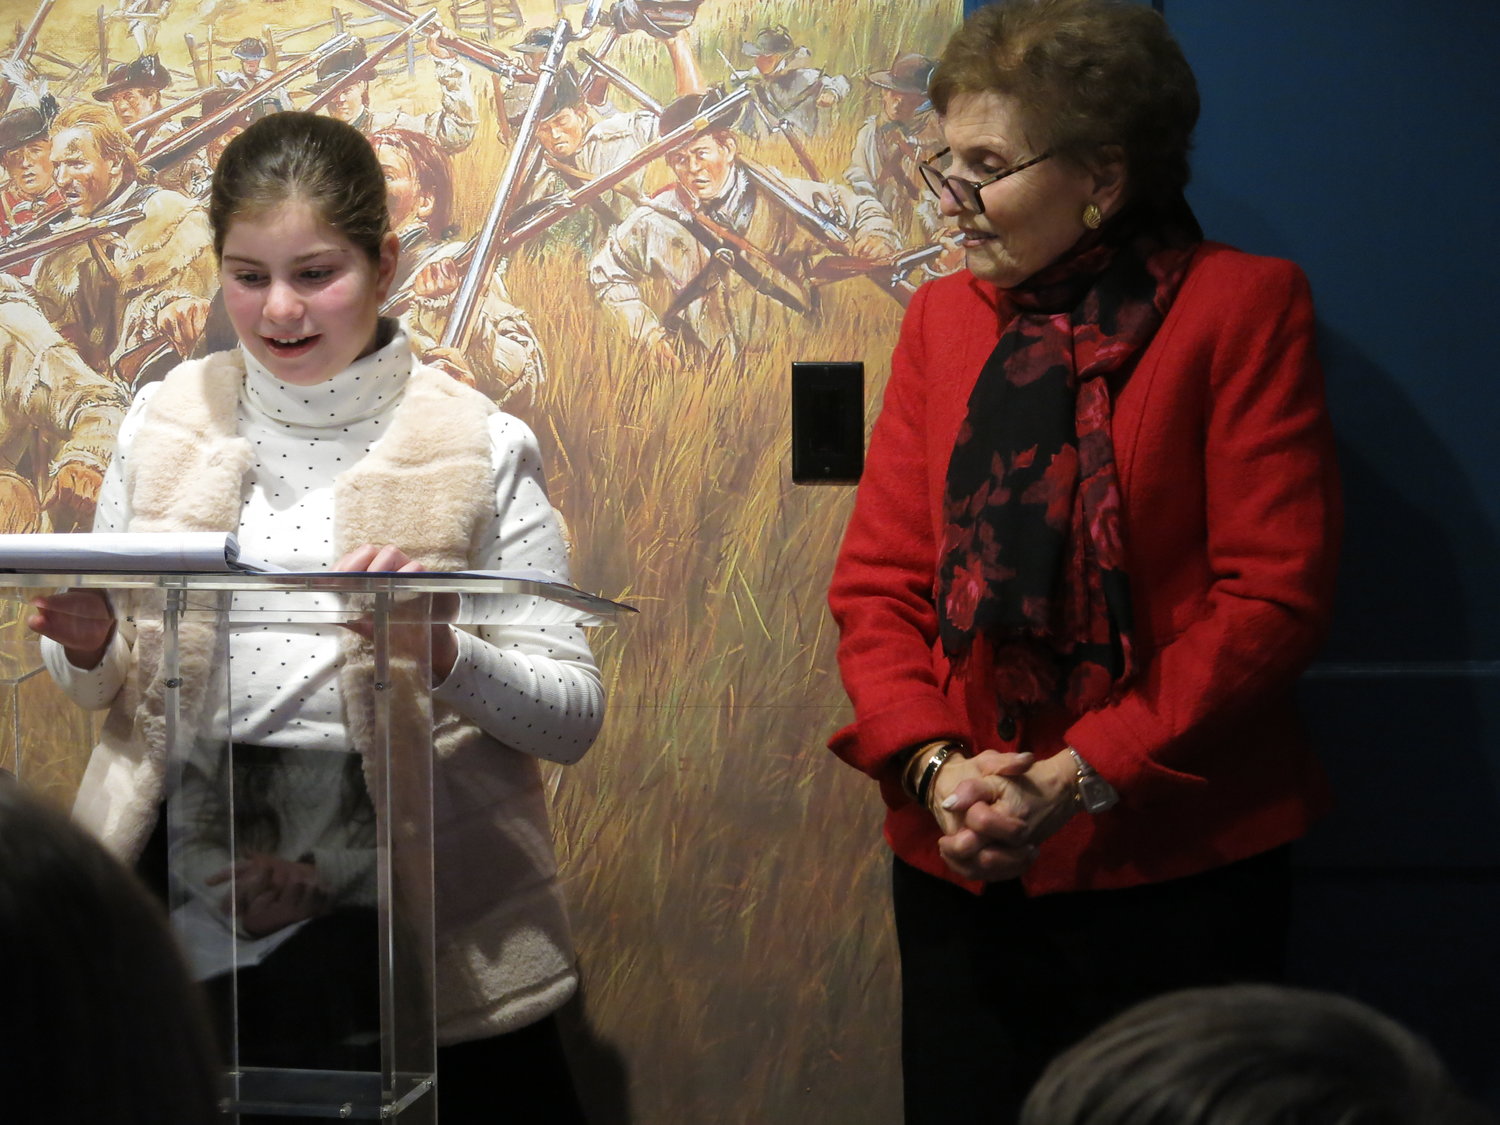 Alessandra Dimilta, a Vernon fourth-grader, read her poem, ‘Colors of Valentine’s Day,’ which earned an honorable mention, on Feb. 13. Elaine Palmer judged the submissions from the fourth-graders.